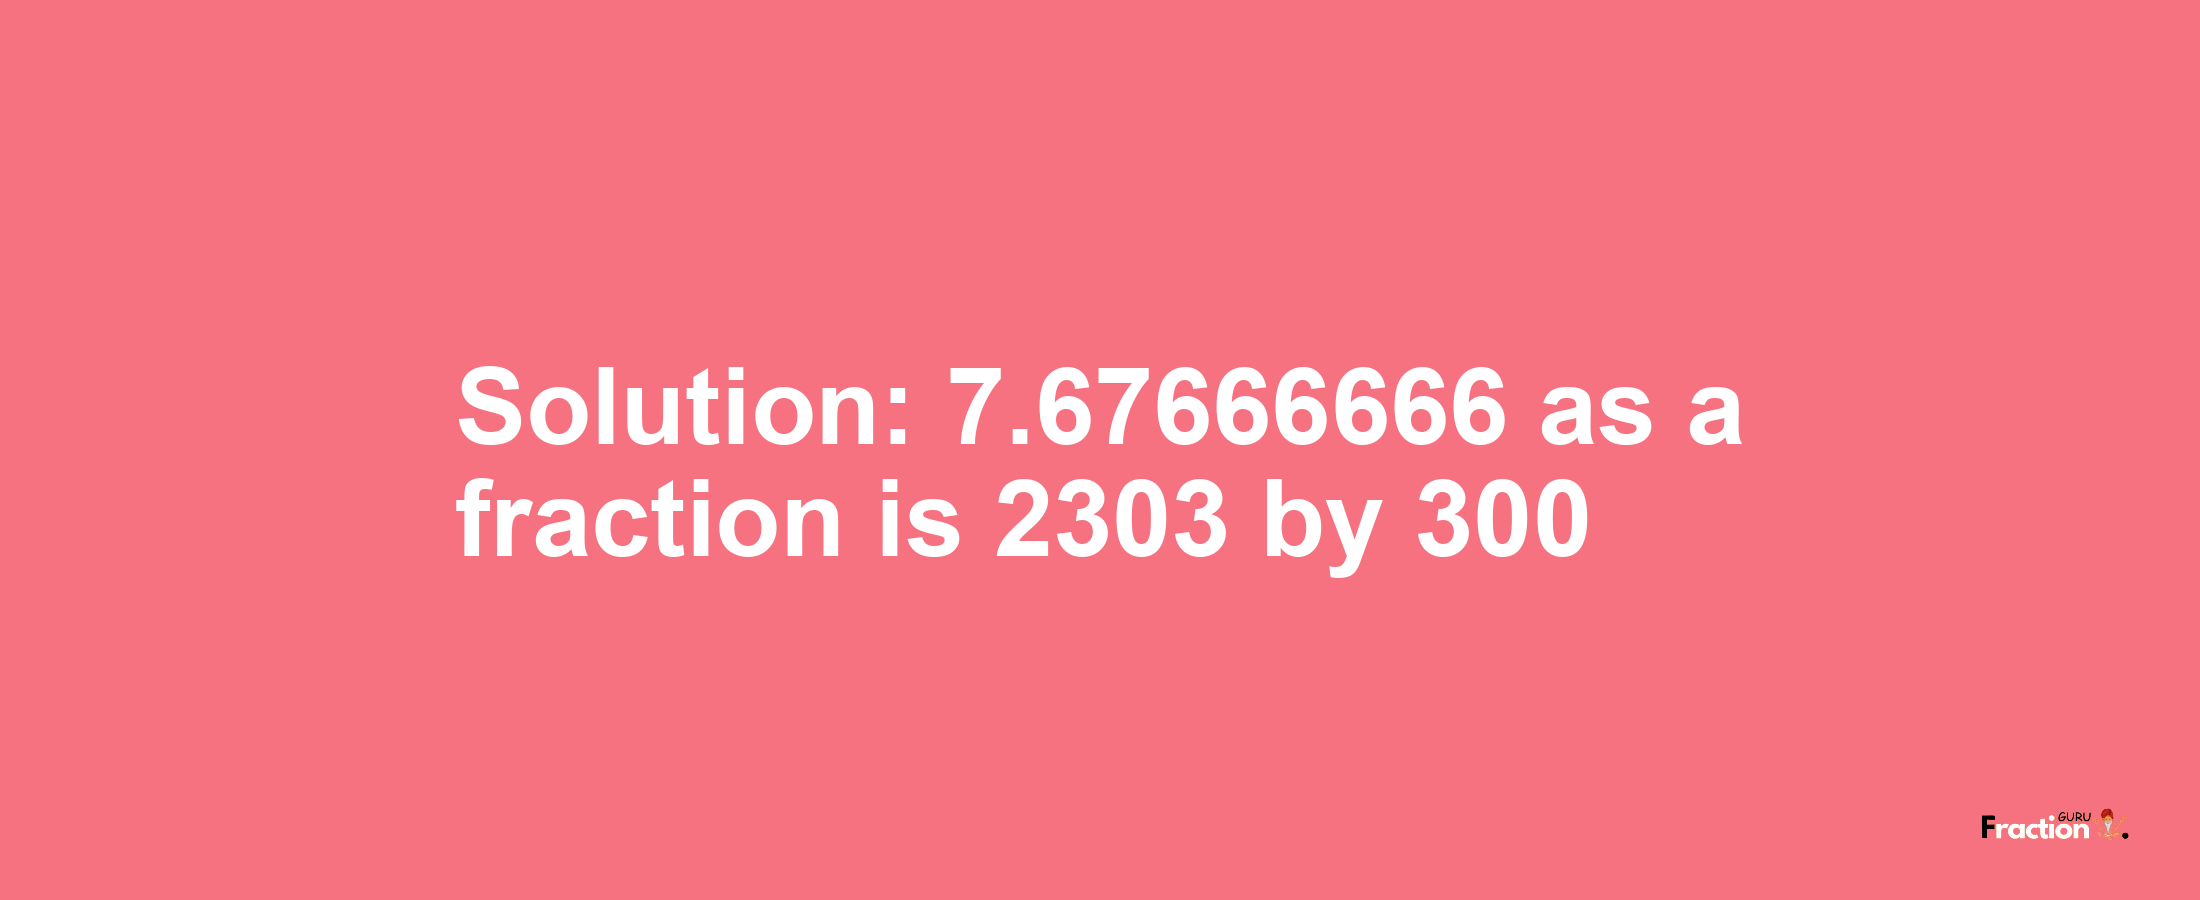 Solution:7.67666666 as a fraction is 2303/300